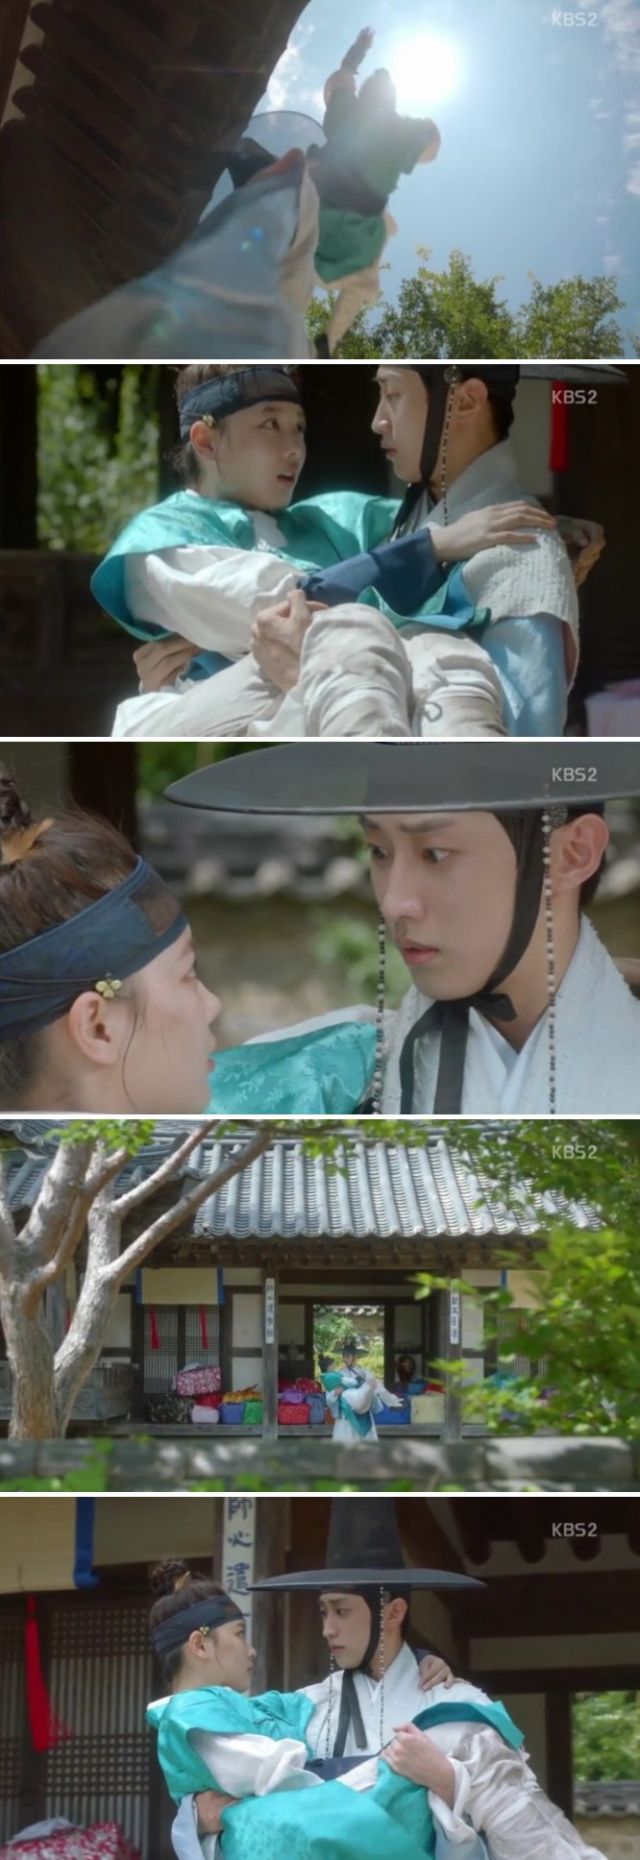 episode 2 captures for the Korean drama 'Moonlight Drawn by Clouds'